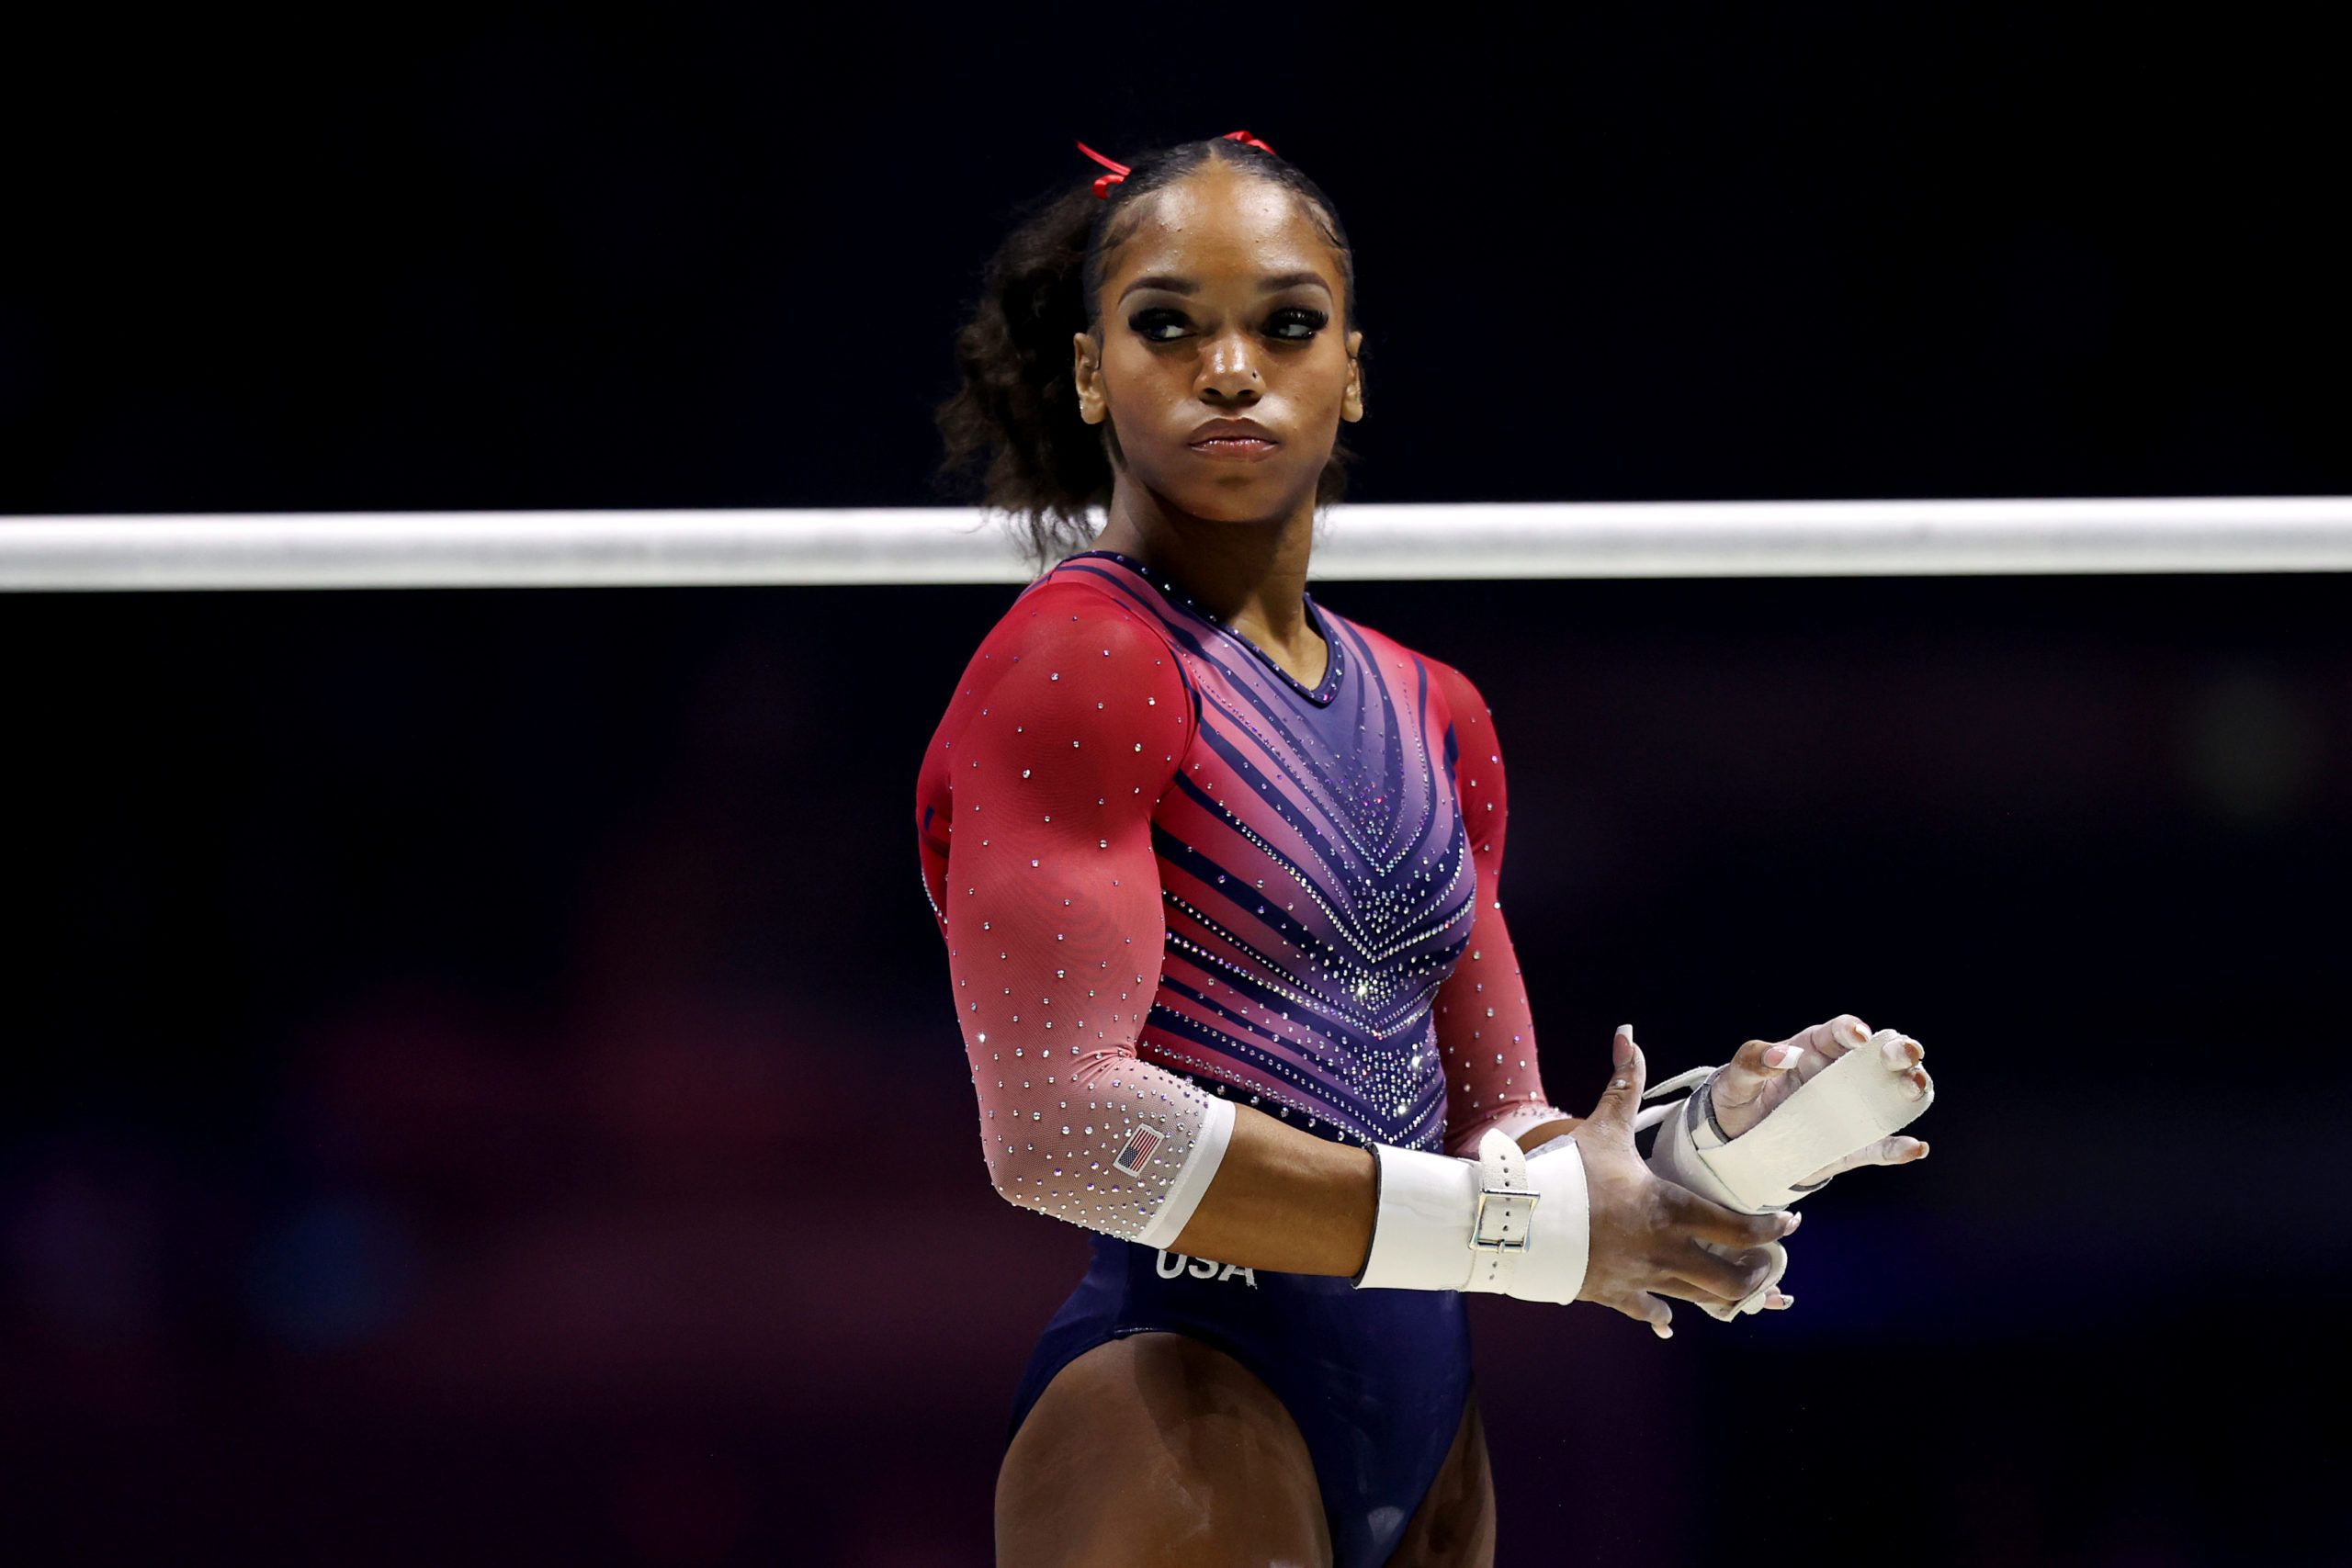 Shilese Jones sets pace for U.S. gymnastics on road to 2024 Olympics